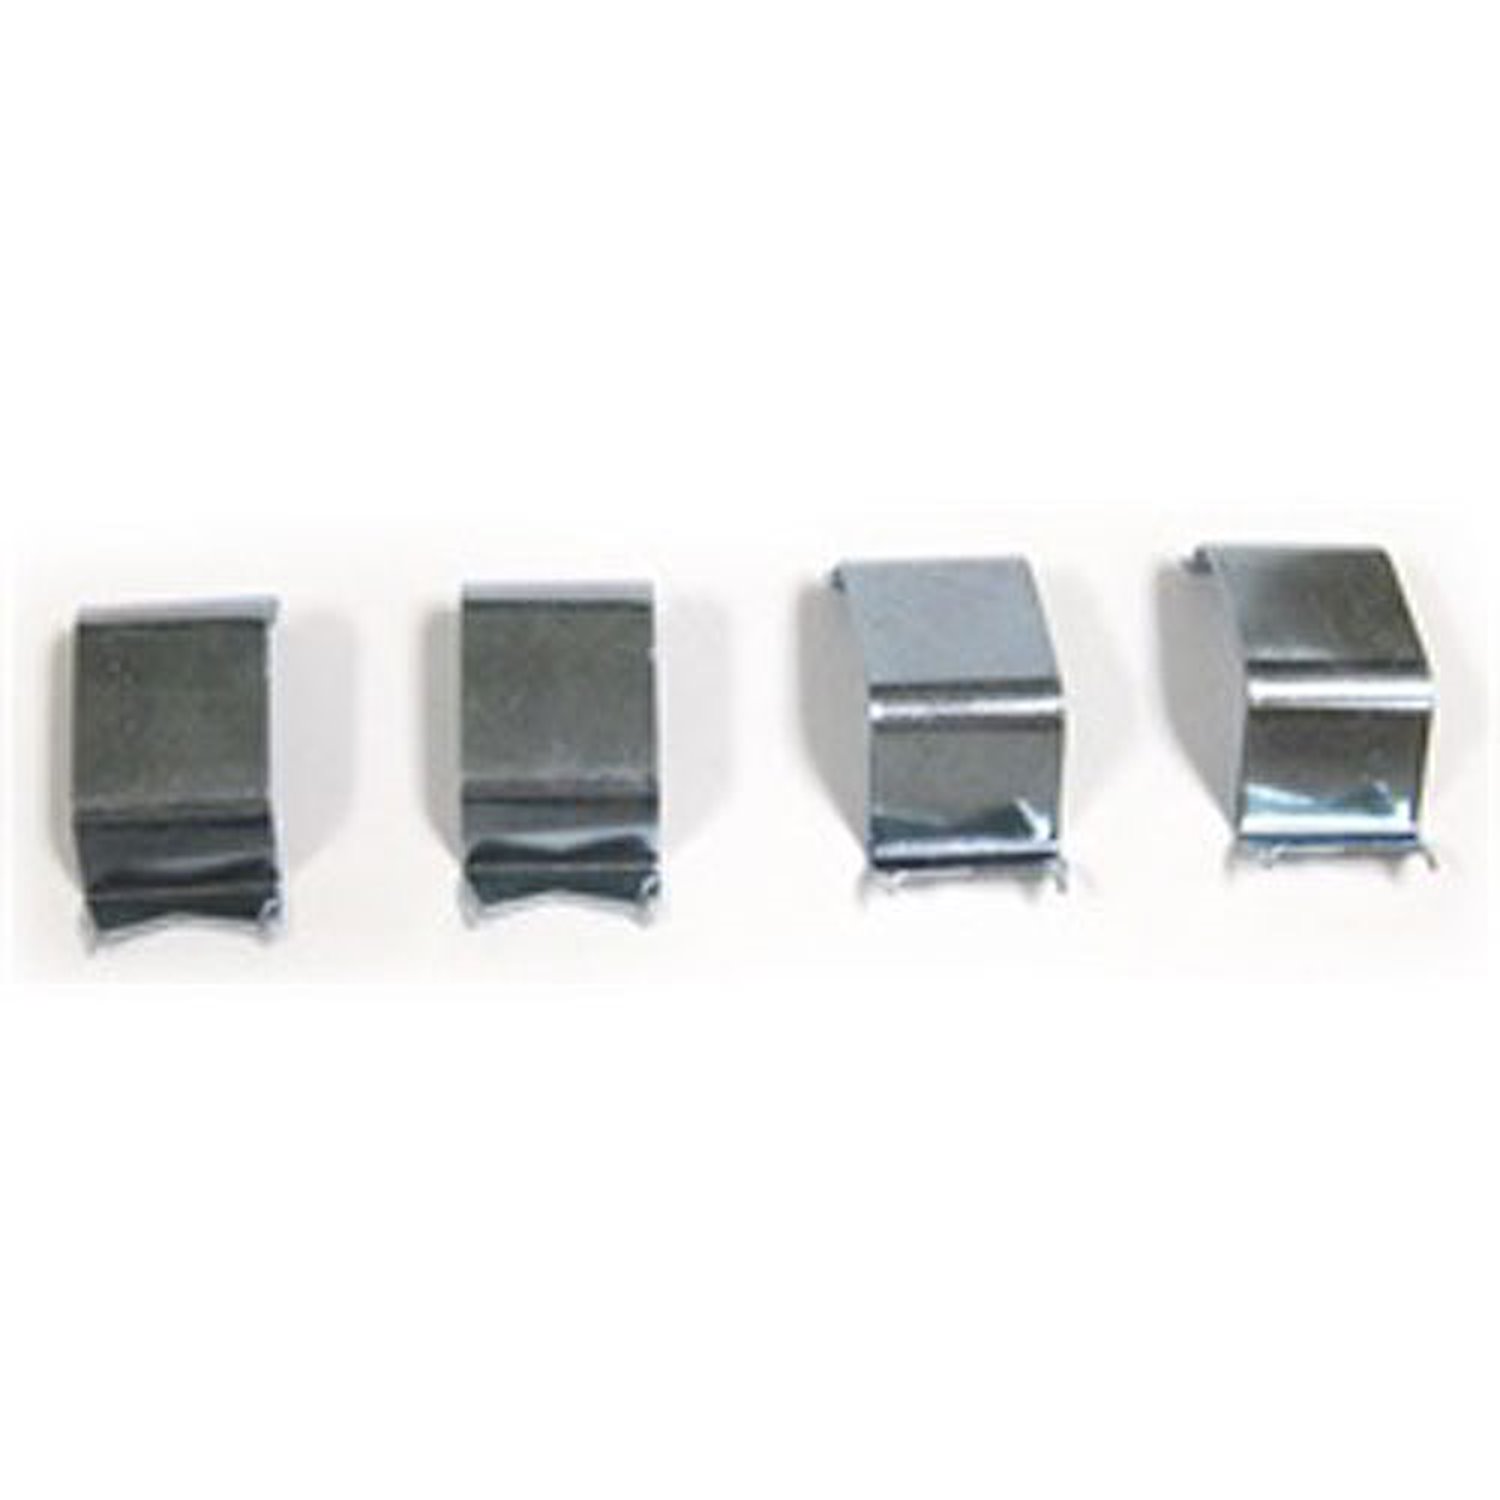 Ligtgate Glass Clip Set 2Dr/4Dr Wagon 55-57 Chevy